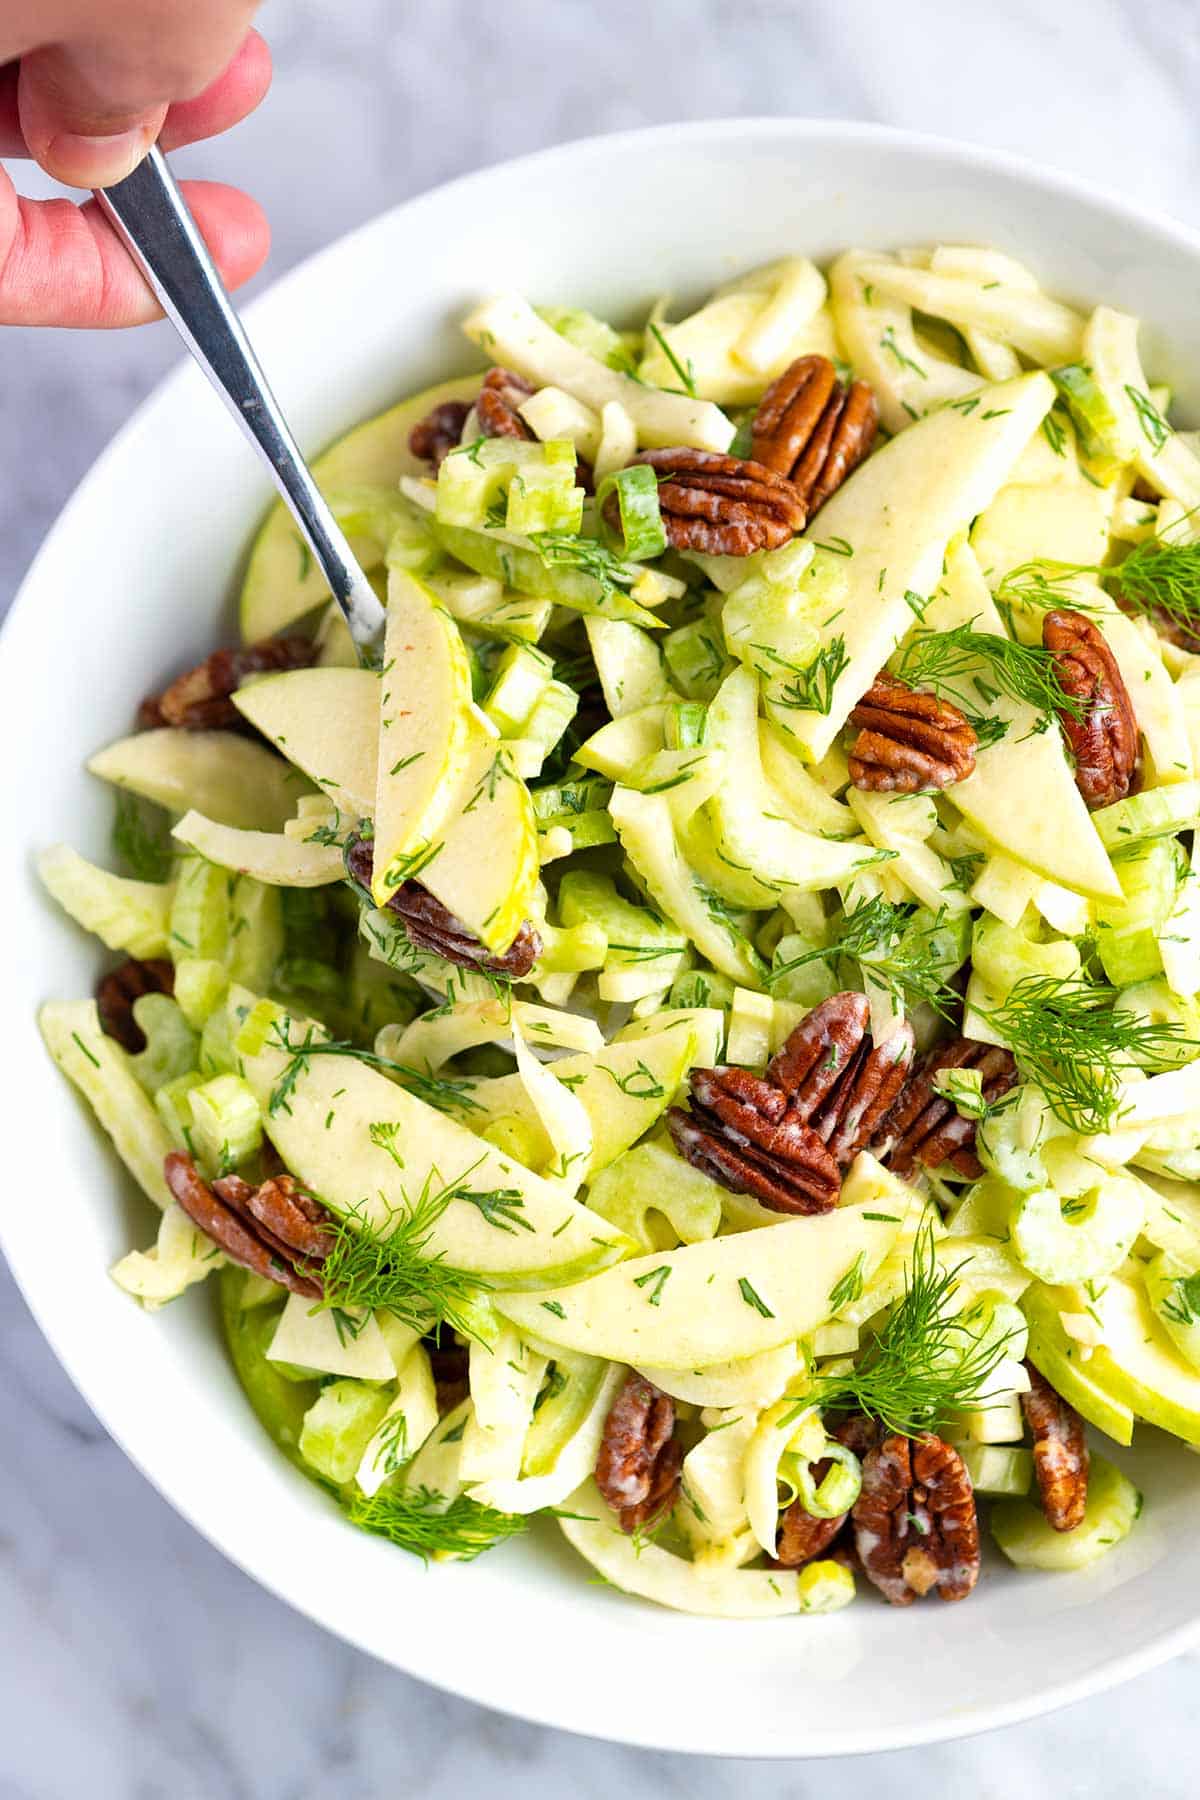 How to Make Creamy, Delicious Apple Salad with Fennel and Celery